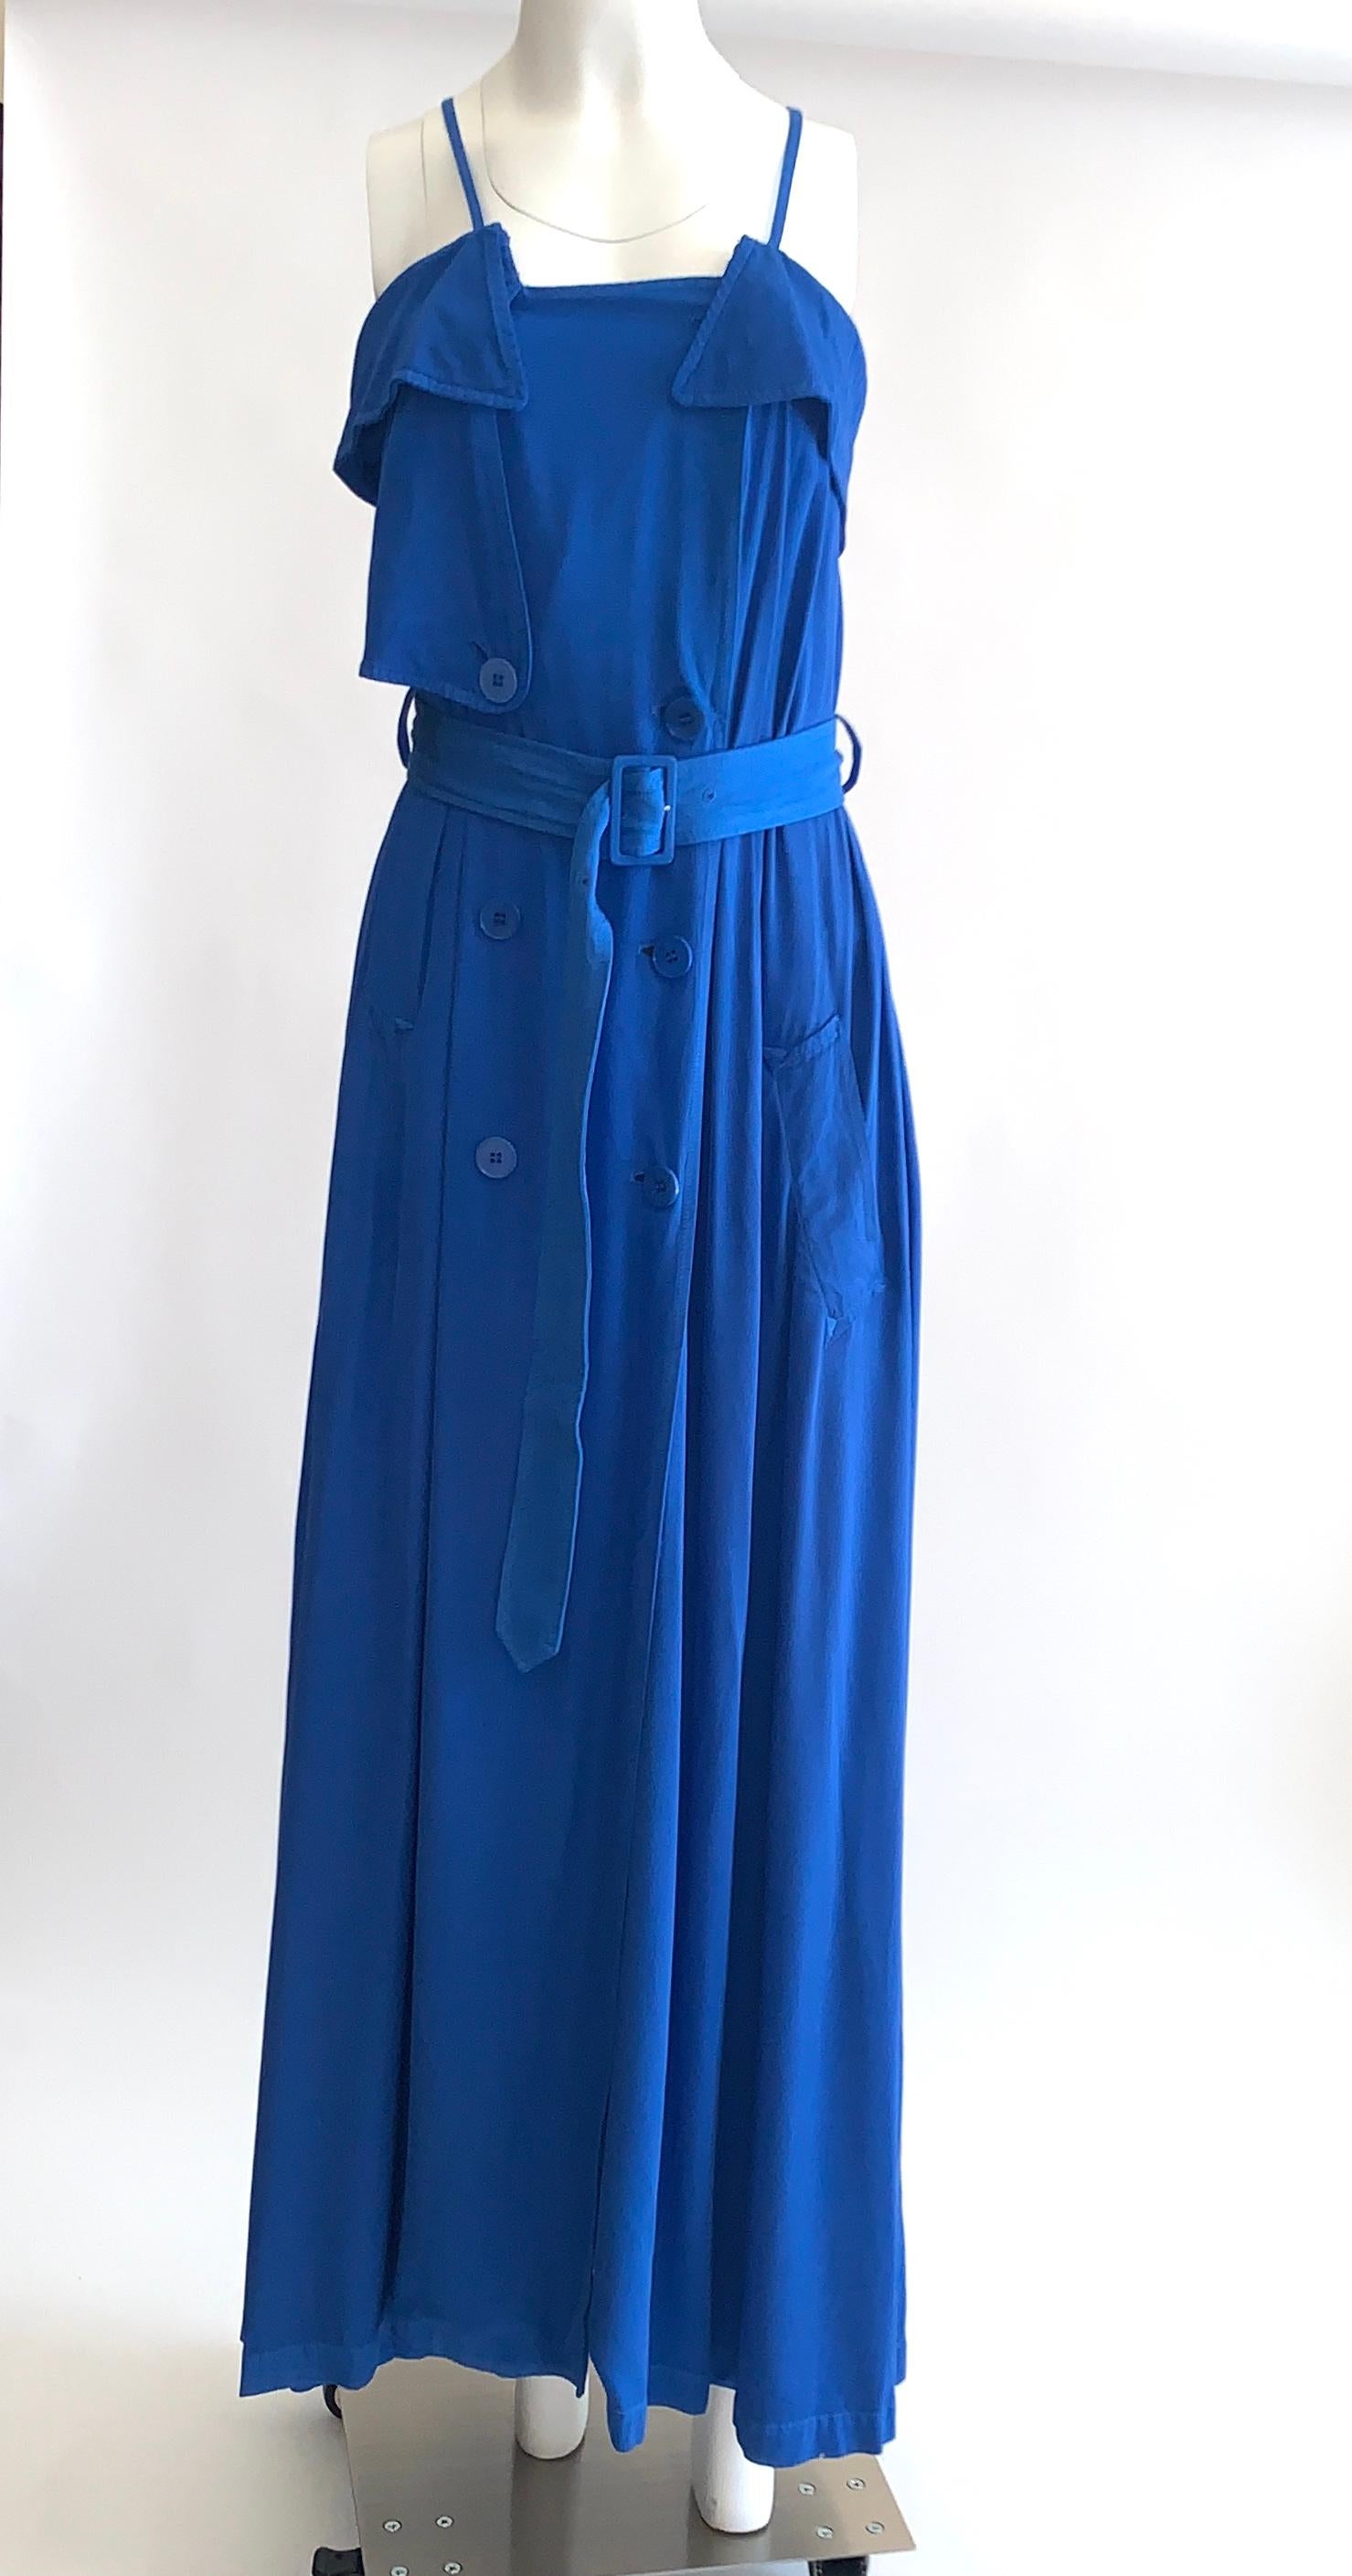 Jean Paul Gaultier Femme blue maxi dress with trench coat detailing. Thin straps can be unsnapped at back to create a criss-cross or halter style. 

Buttons up front. Adjustable belt. Side pockets.

100% rayon.

Made in Italy.

Size It 40, US